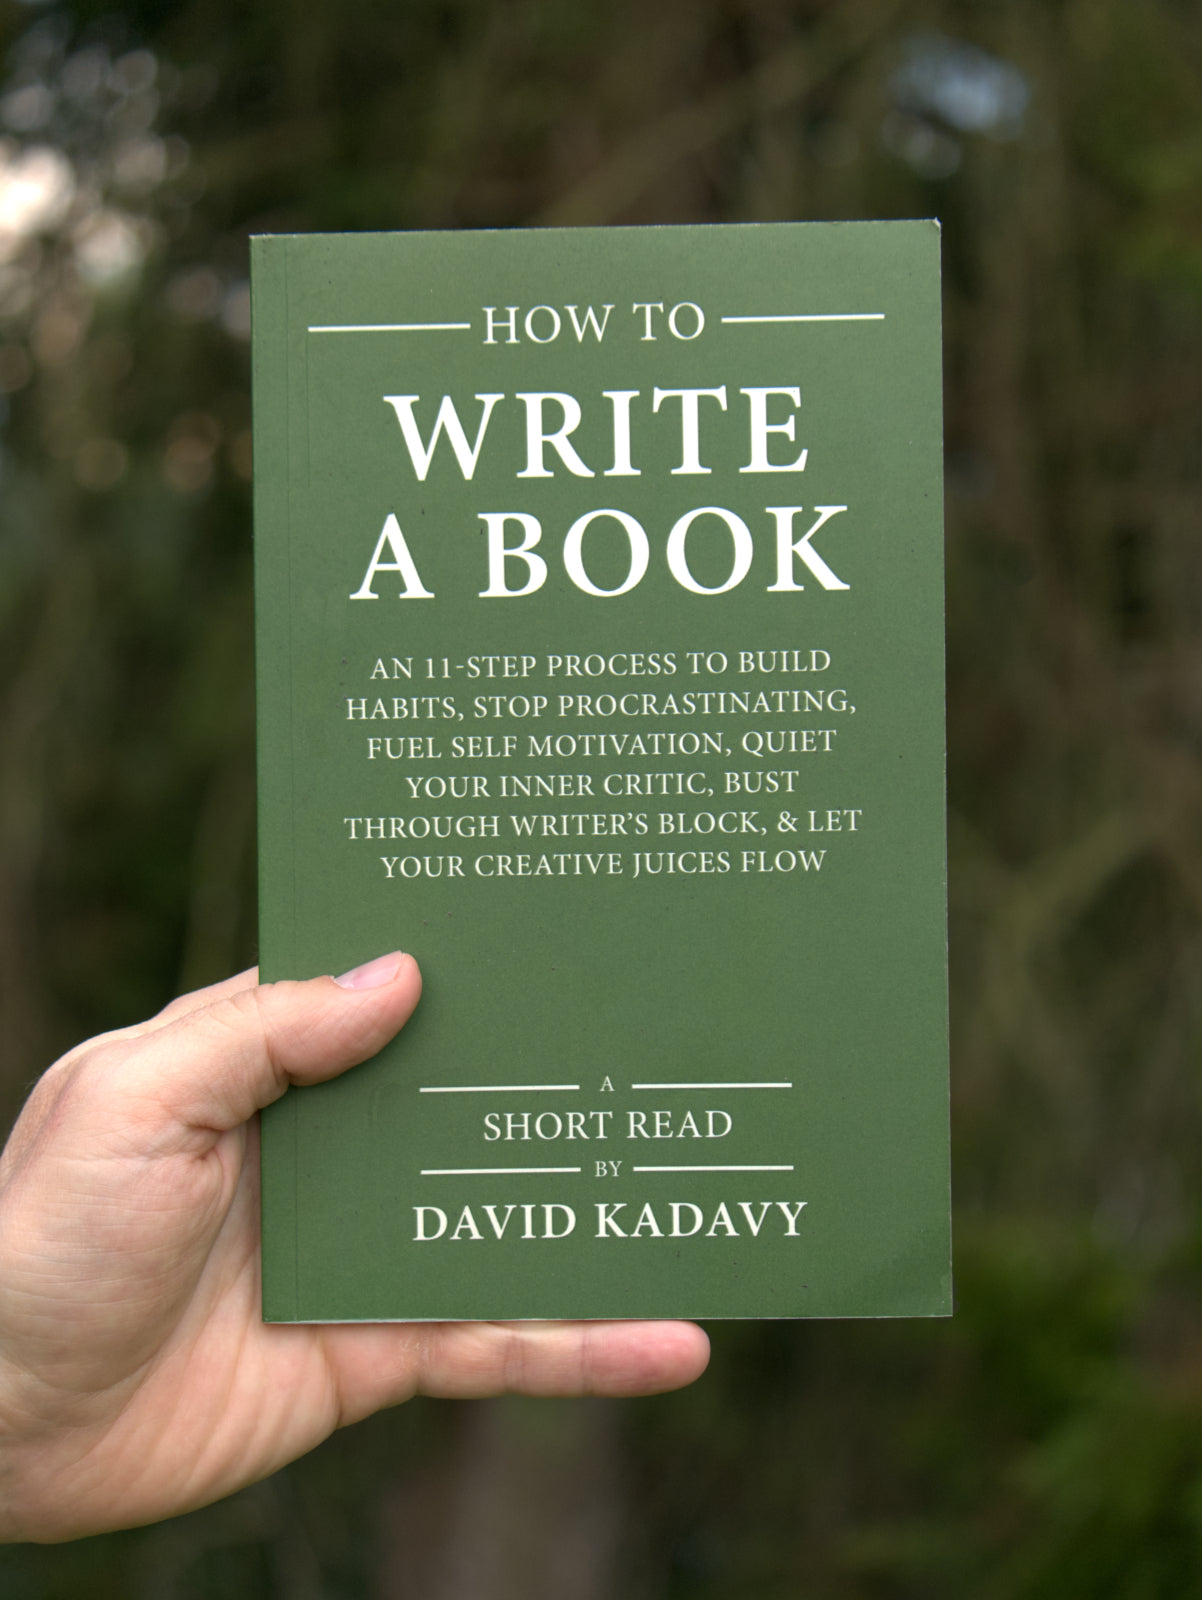 How to Write a Book (Short Read)